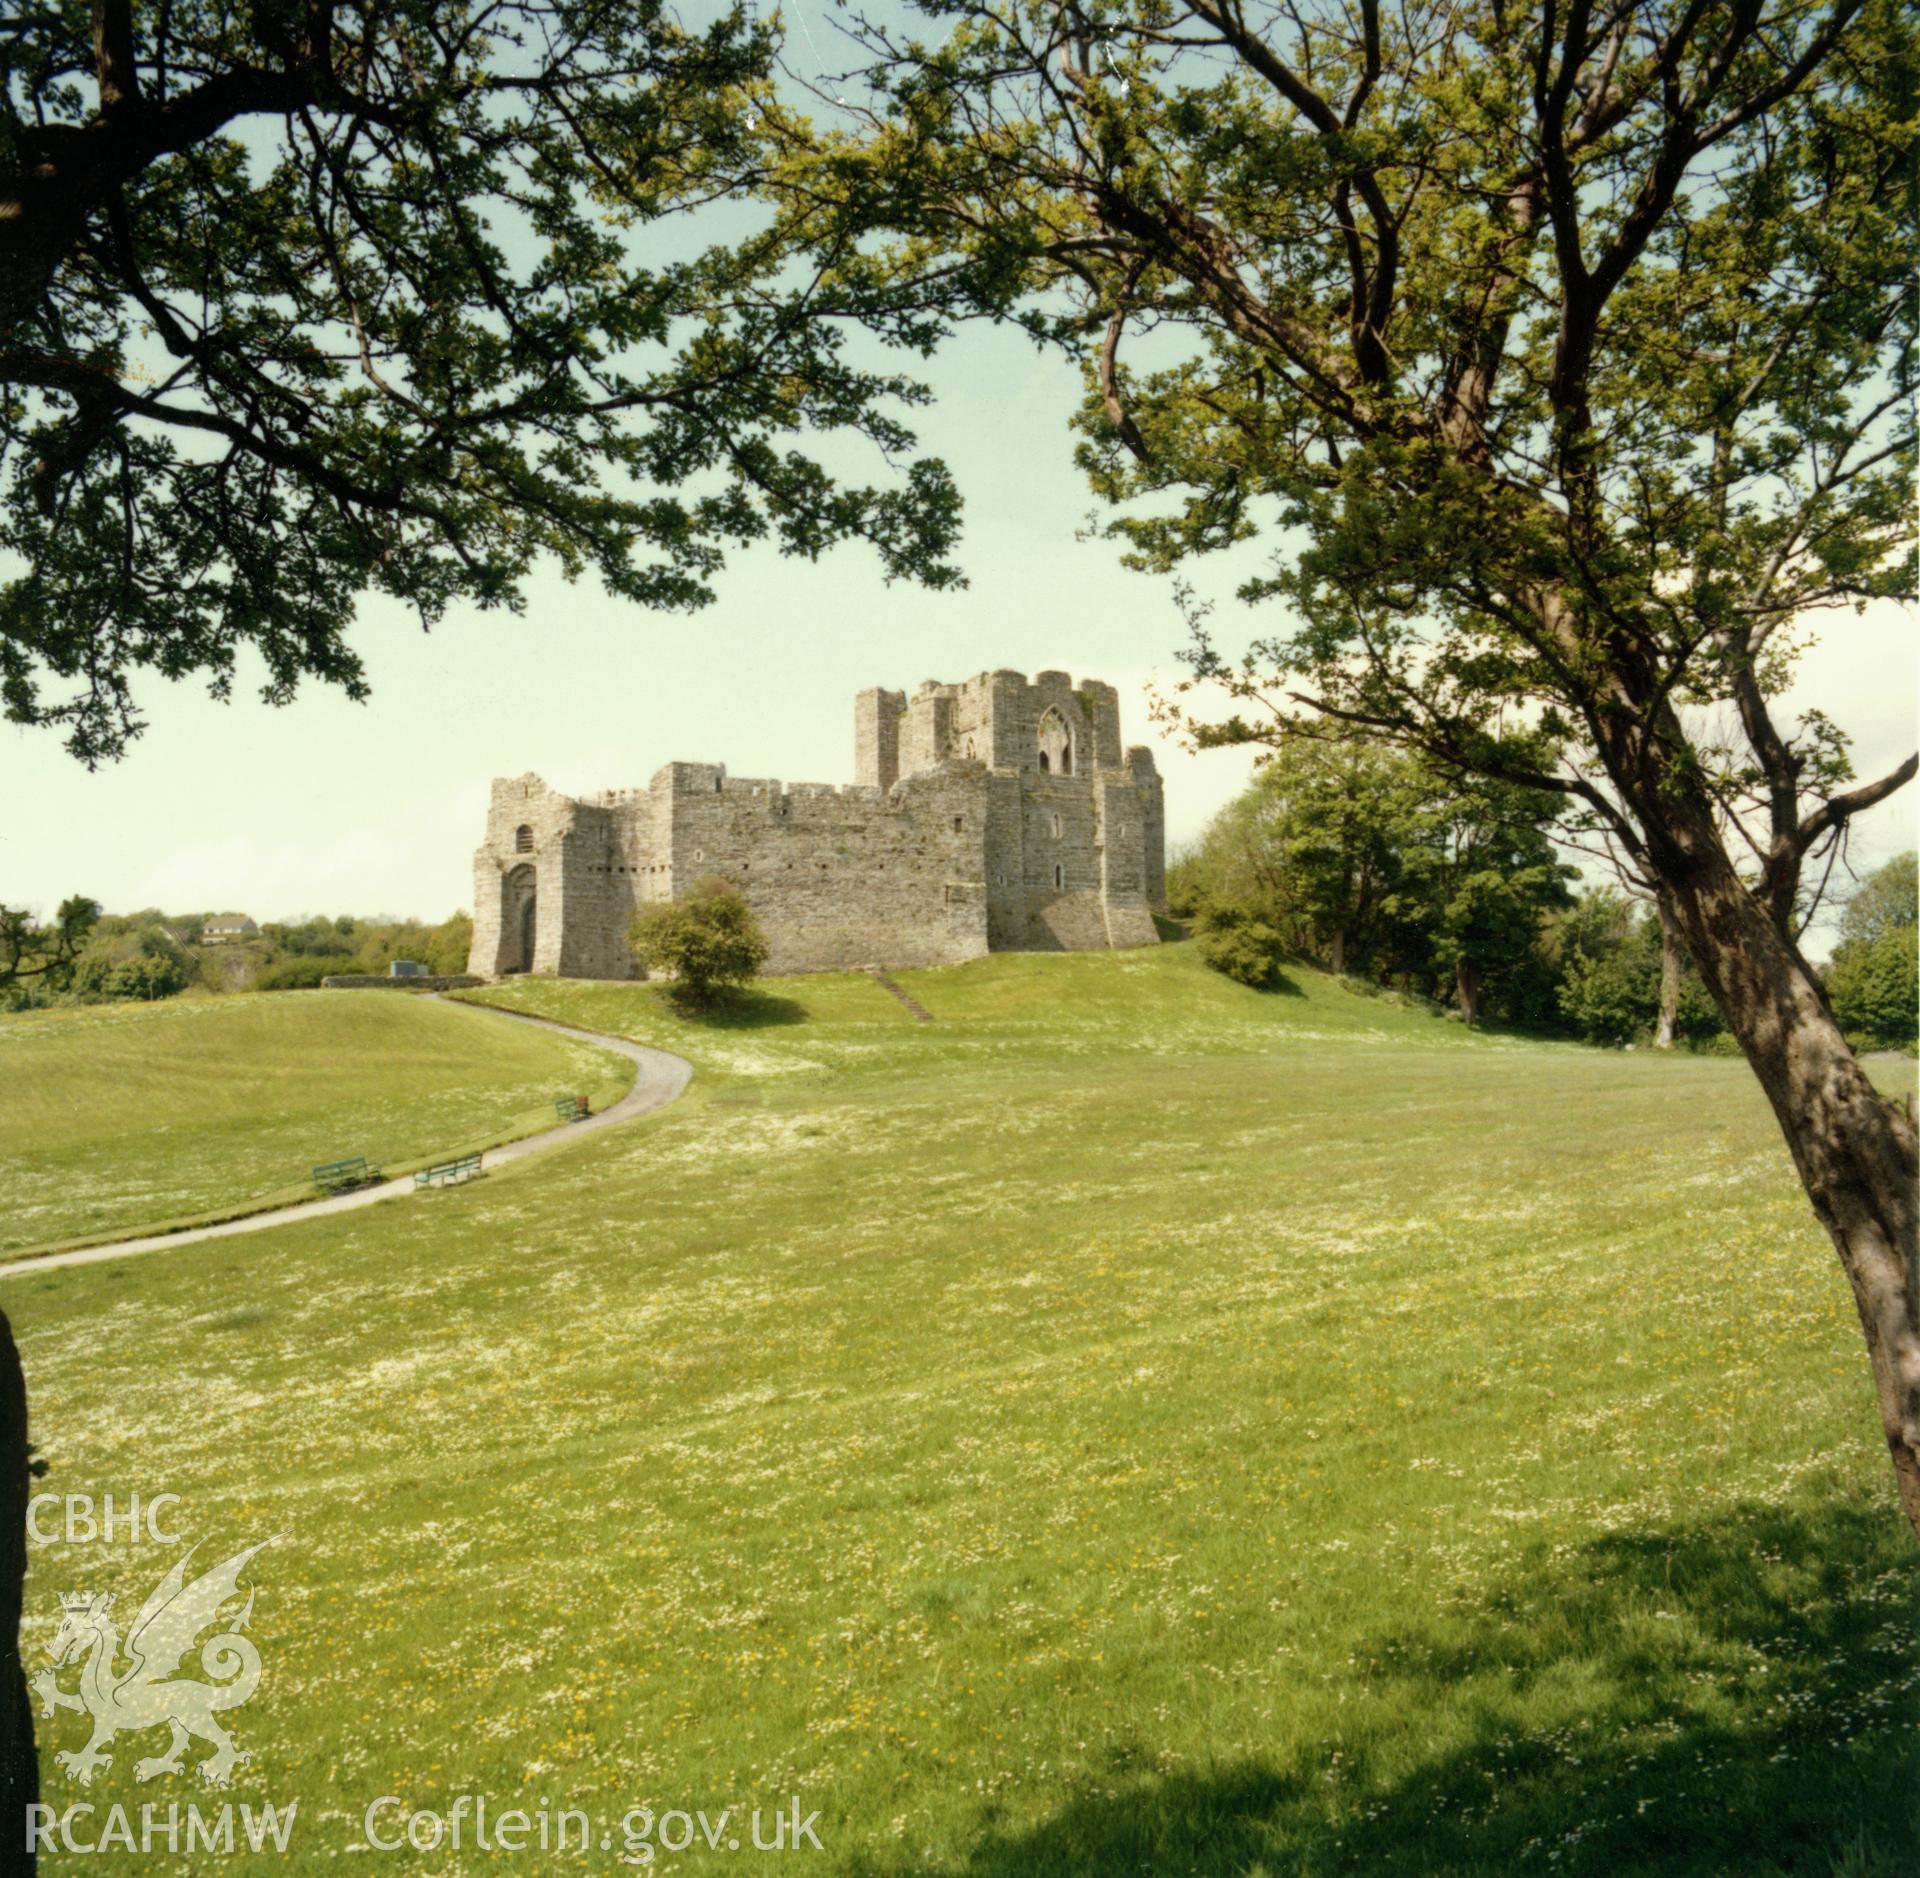 General view of Oystermouth Castle, from the Central Office of Information.